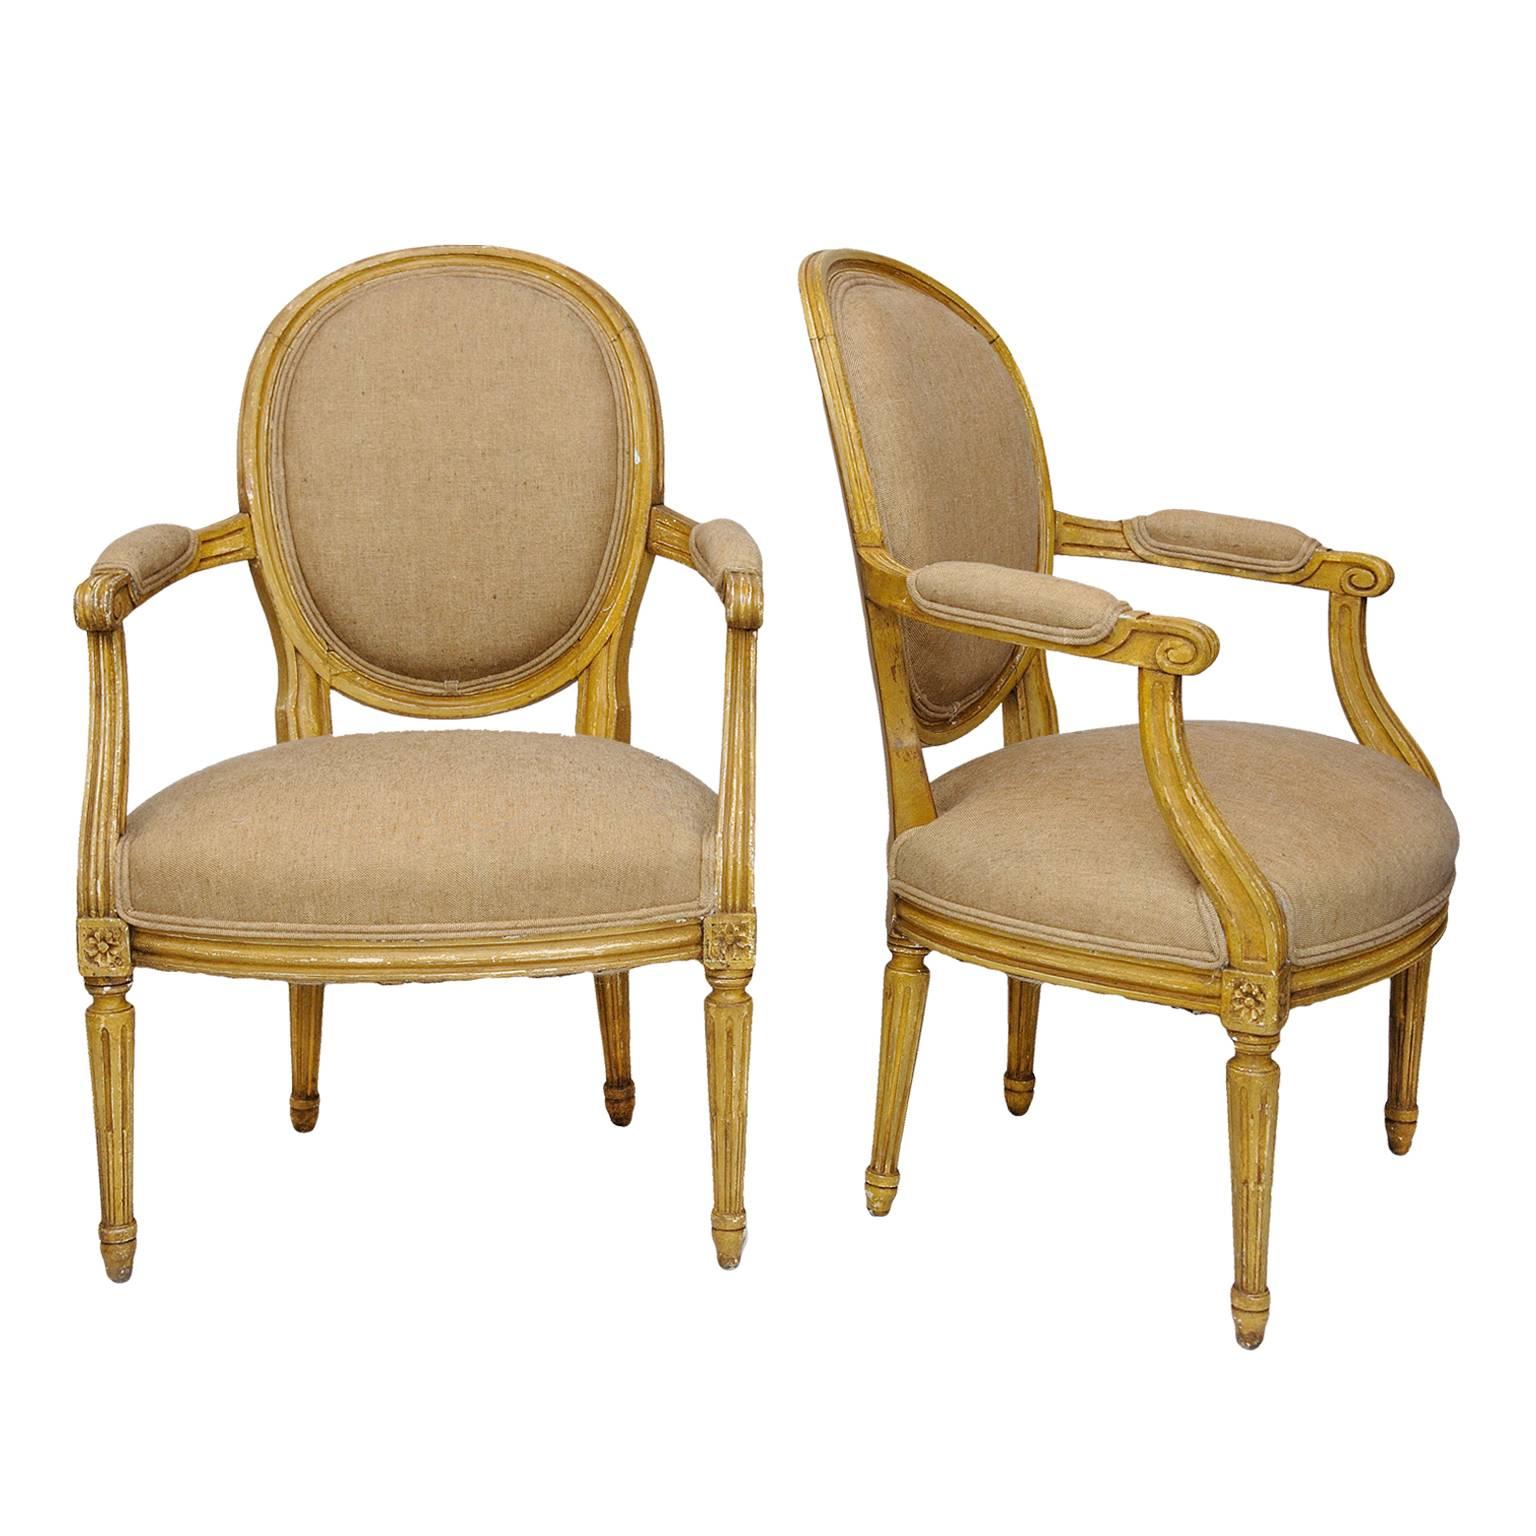 Pair of French Neoclassical Painted Louis XVI Open Armchairs, circa 1780 For Sale